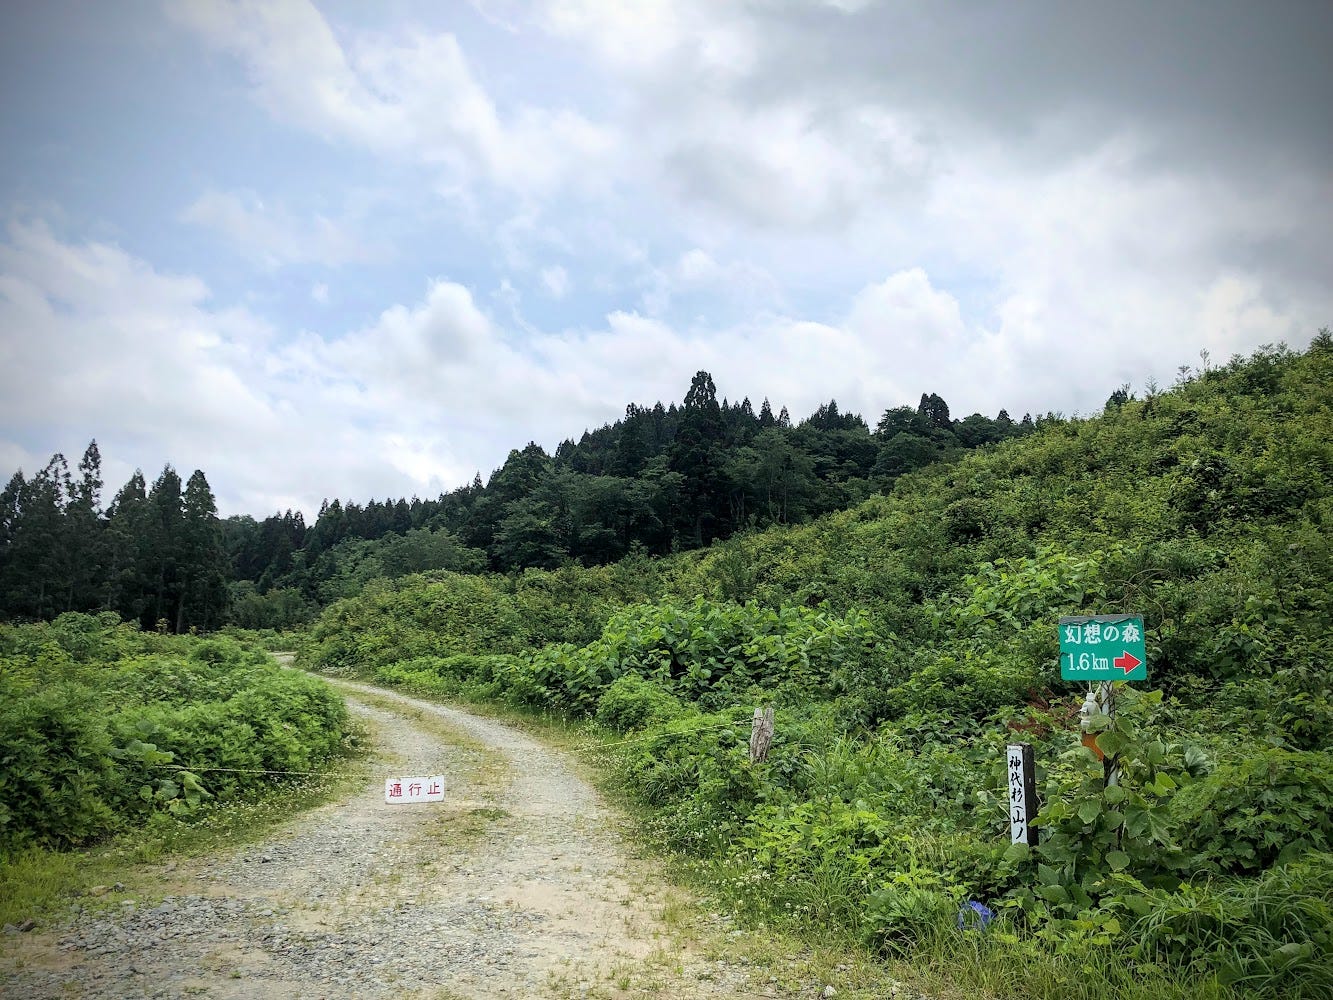 A gravel road with a pine forest in the distance, the Tsuchiyu-yama trailhead.